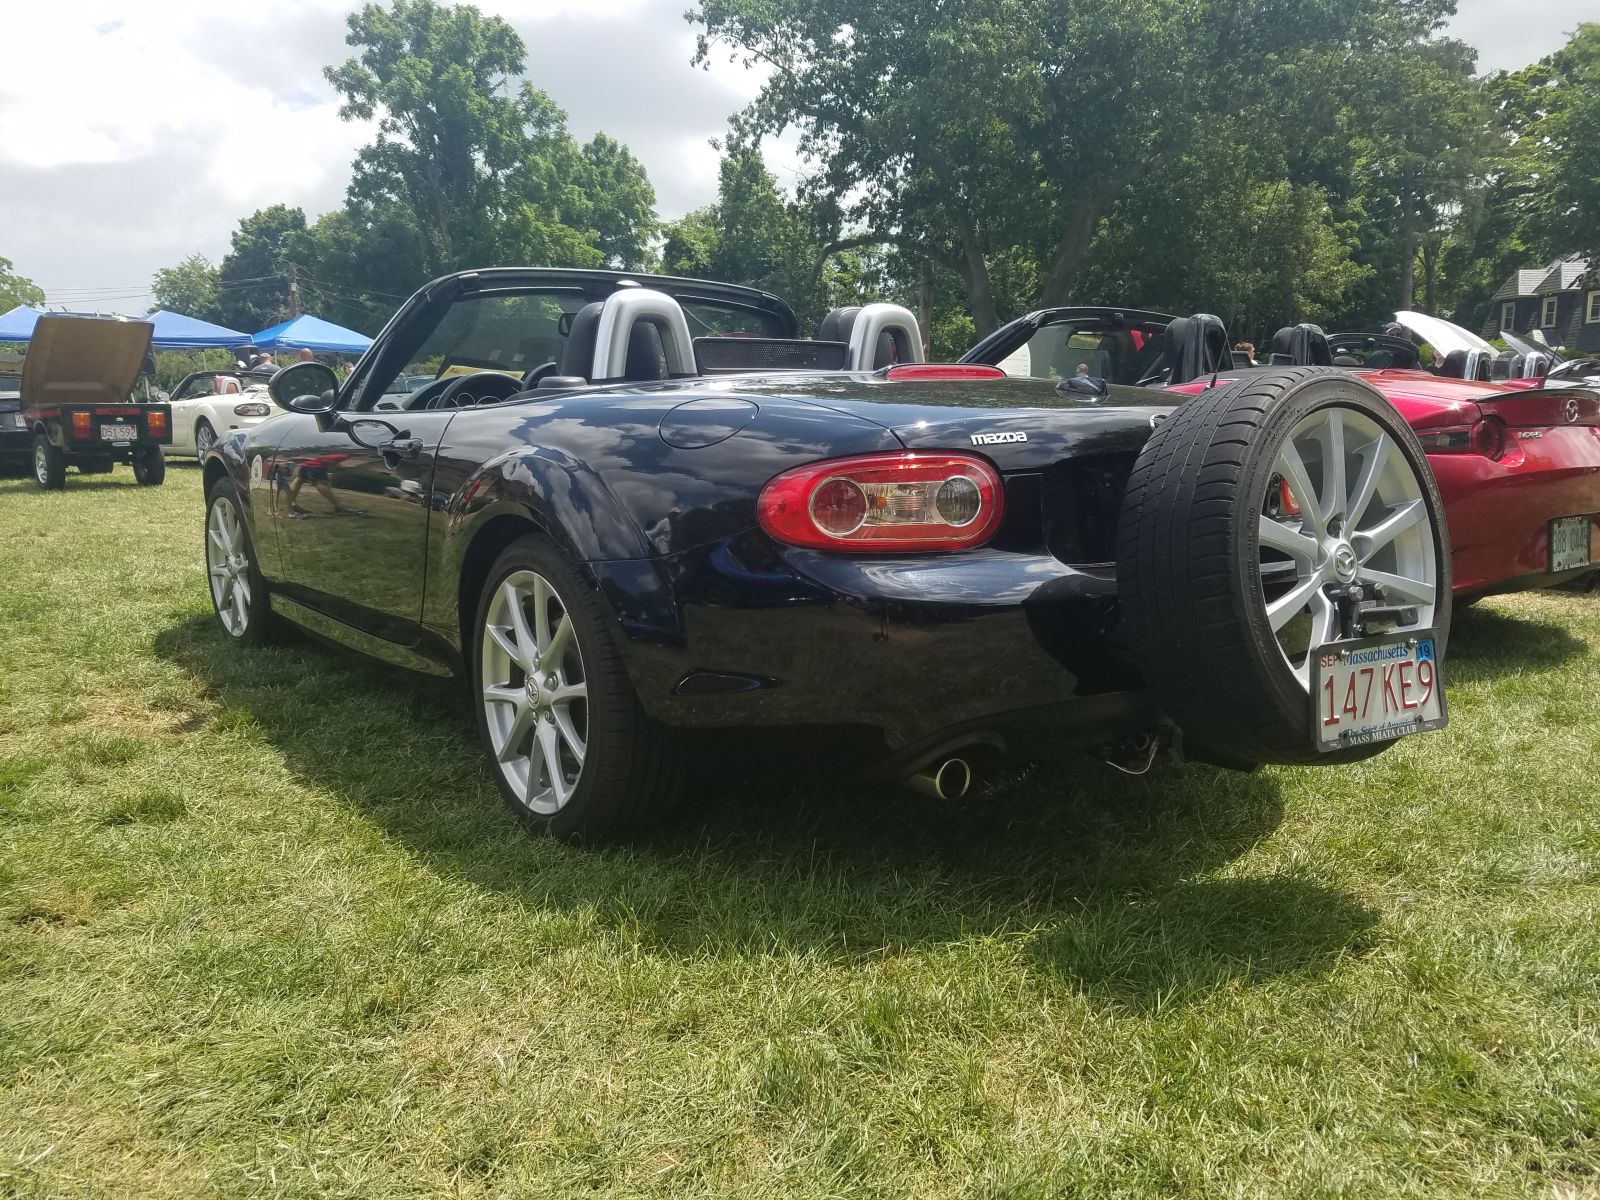 Apparently this is a relatively common Miata mod? There were a few like this. You have to wonder... is the rear end a pendulum now and what does that do to the handling?